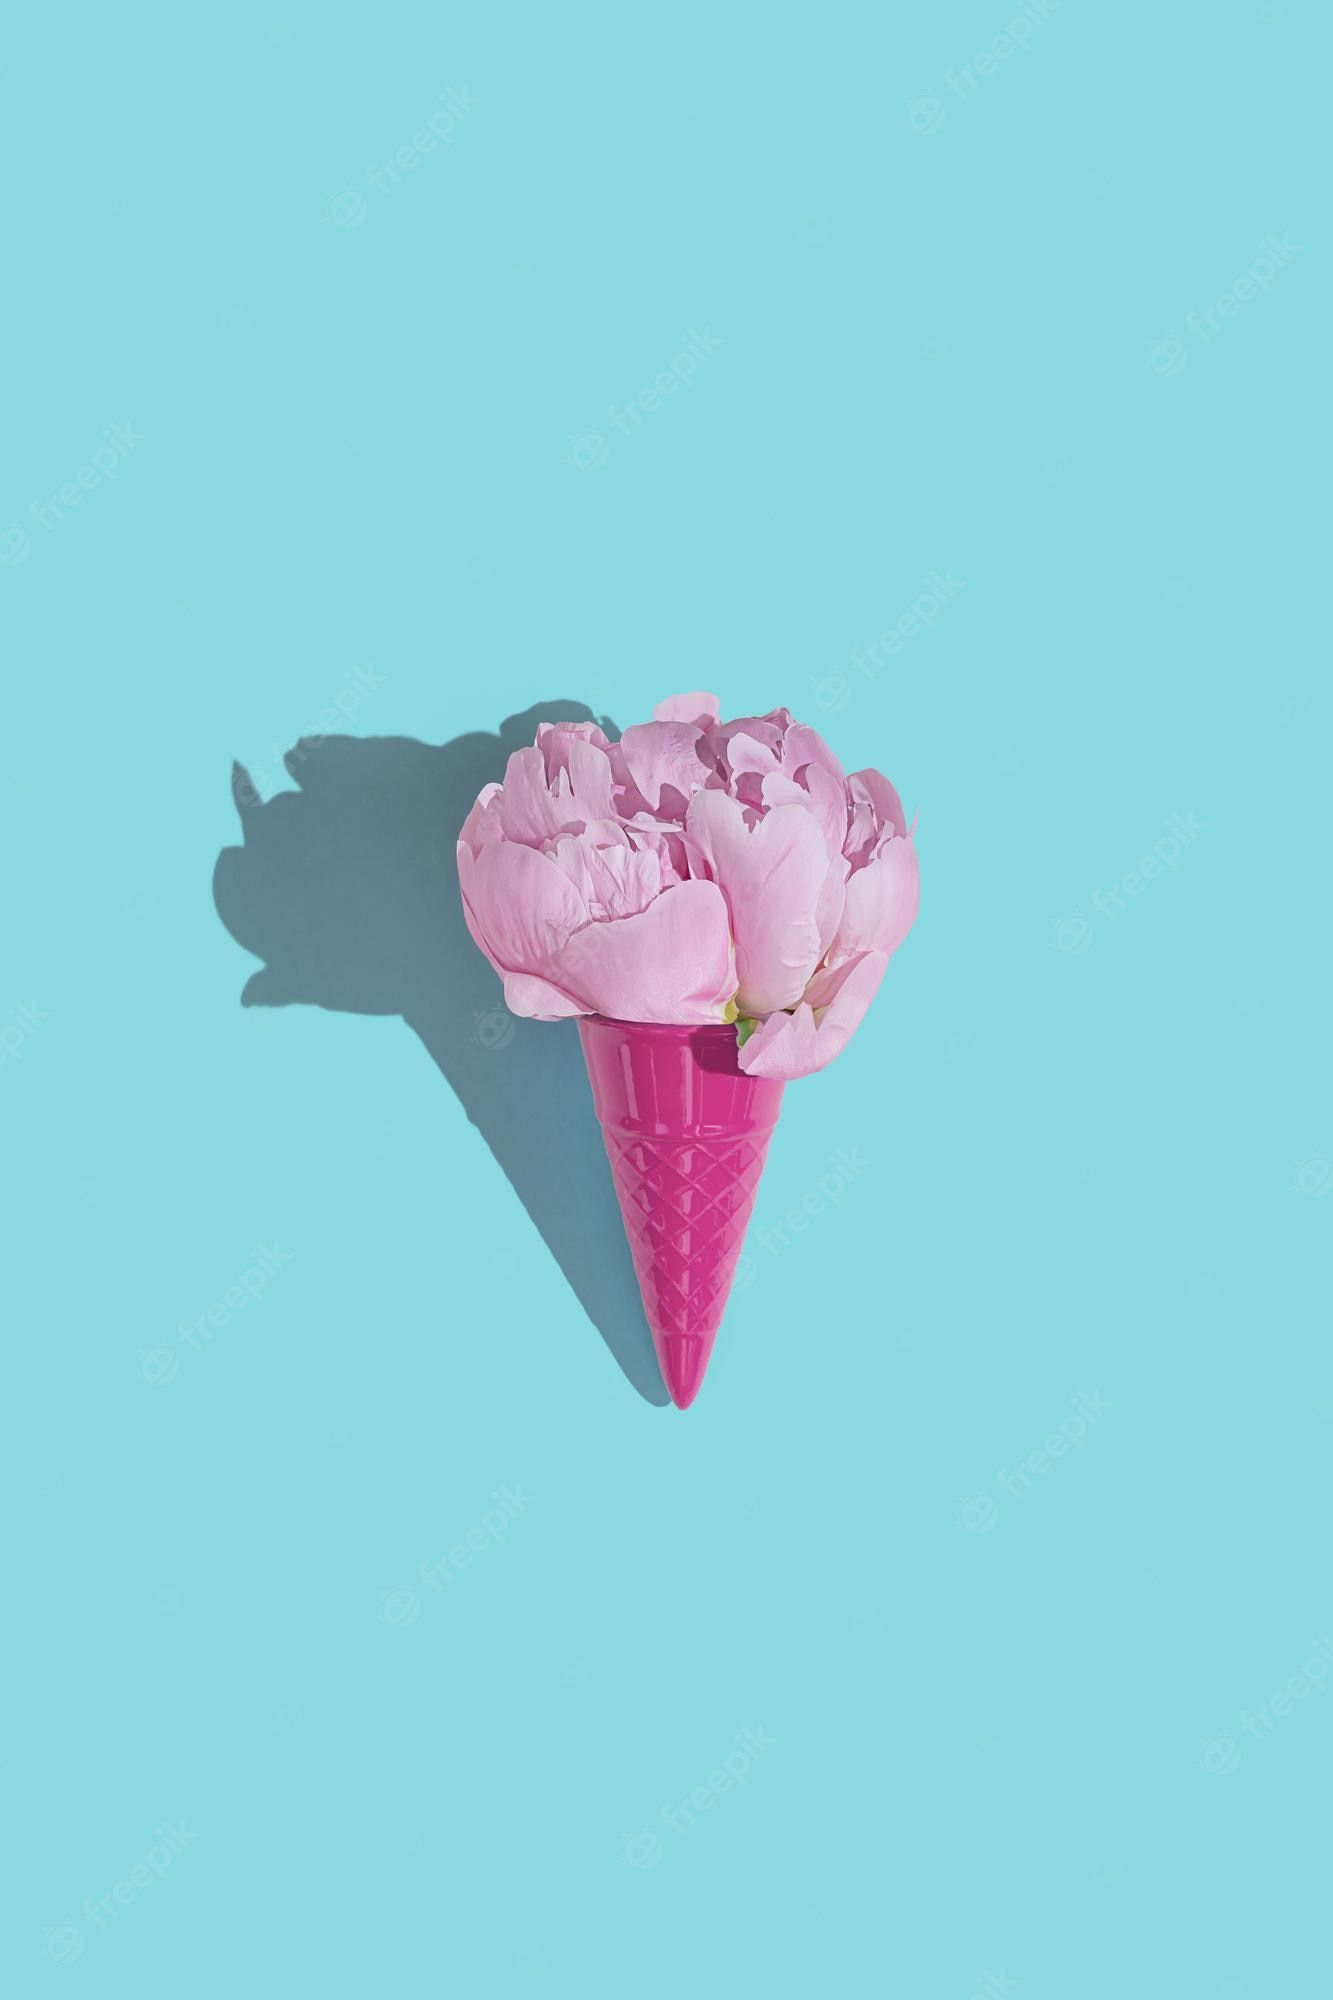 A pink flower in an ice cream cone - Ice cream